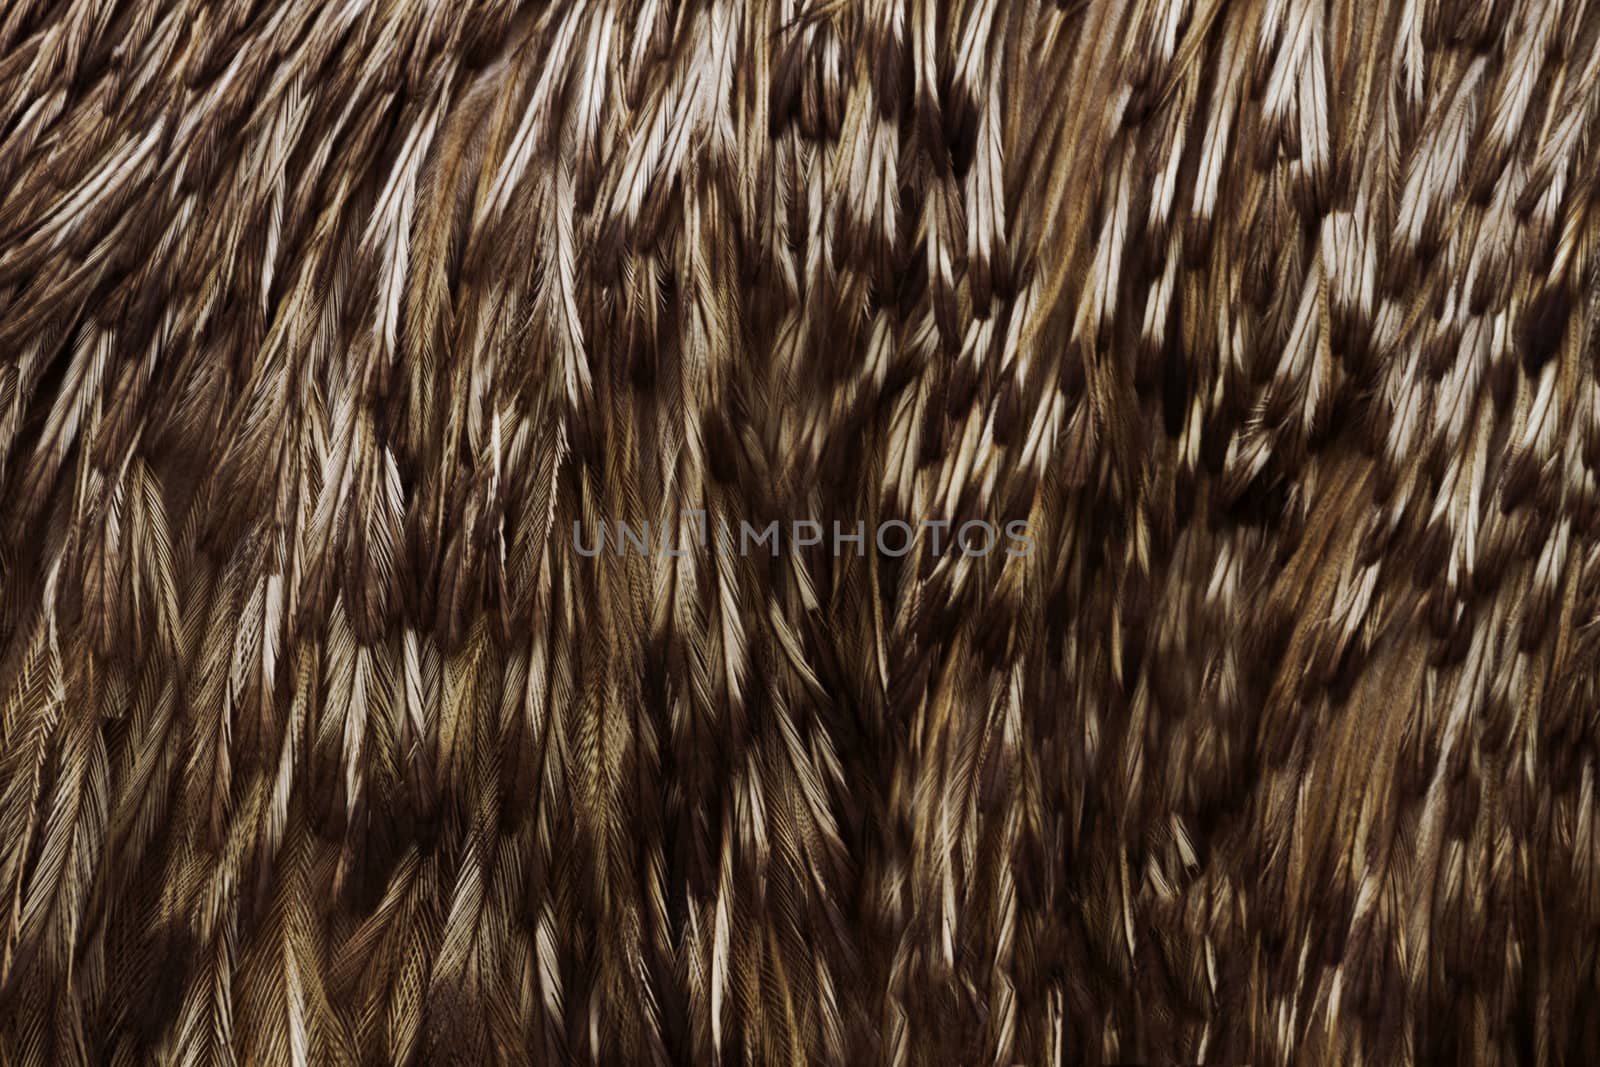 Close up of unique, double plumed, almost hairlike feathers of emu, a bird that is Australia's largest and flightless. Location is Tower Hill Reserve National Park, Victoria, Australia.